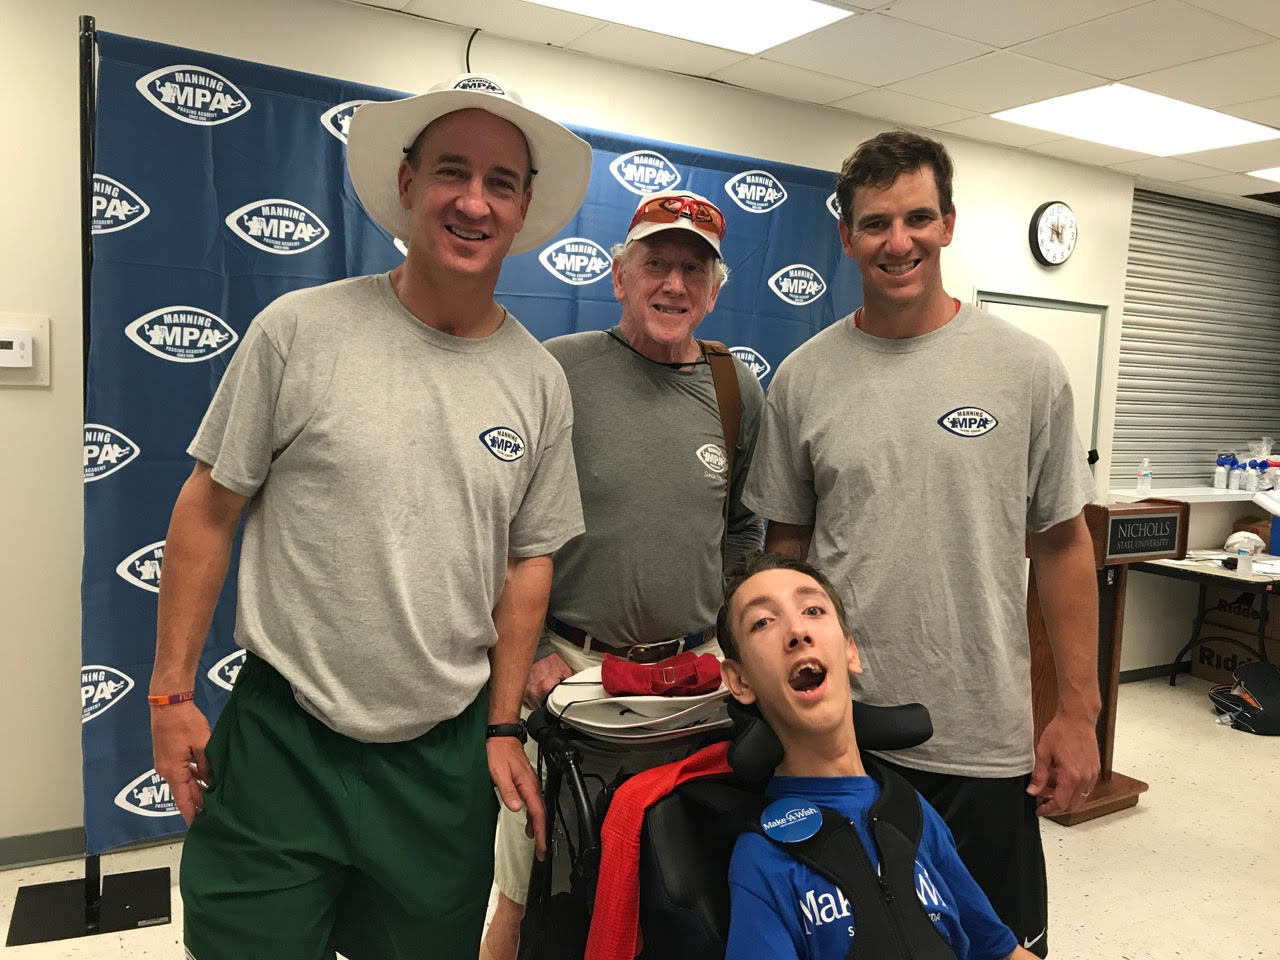 William Klick, an 18-year Longboater, met the first family of football last summer at a football camp in Louisiana.